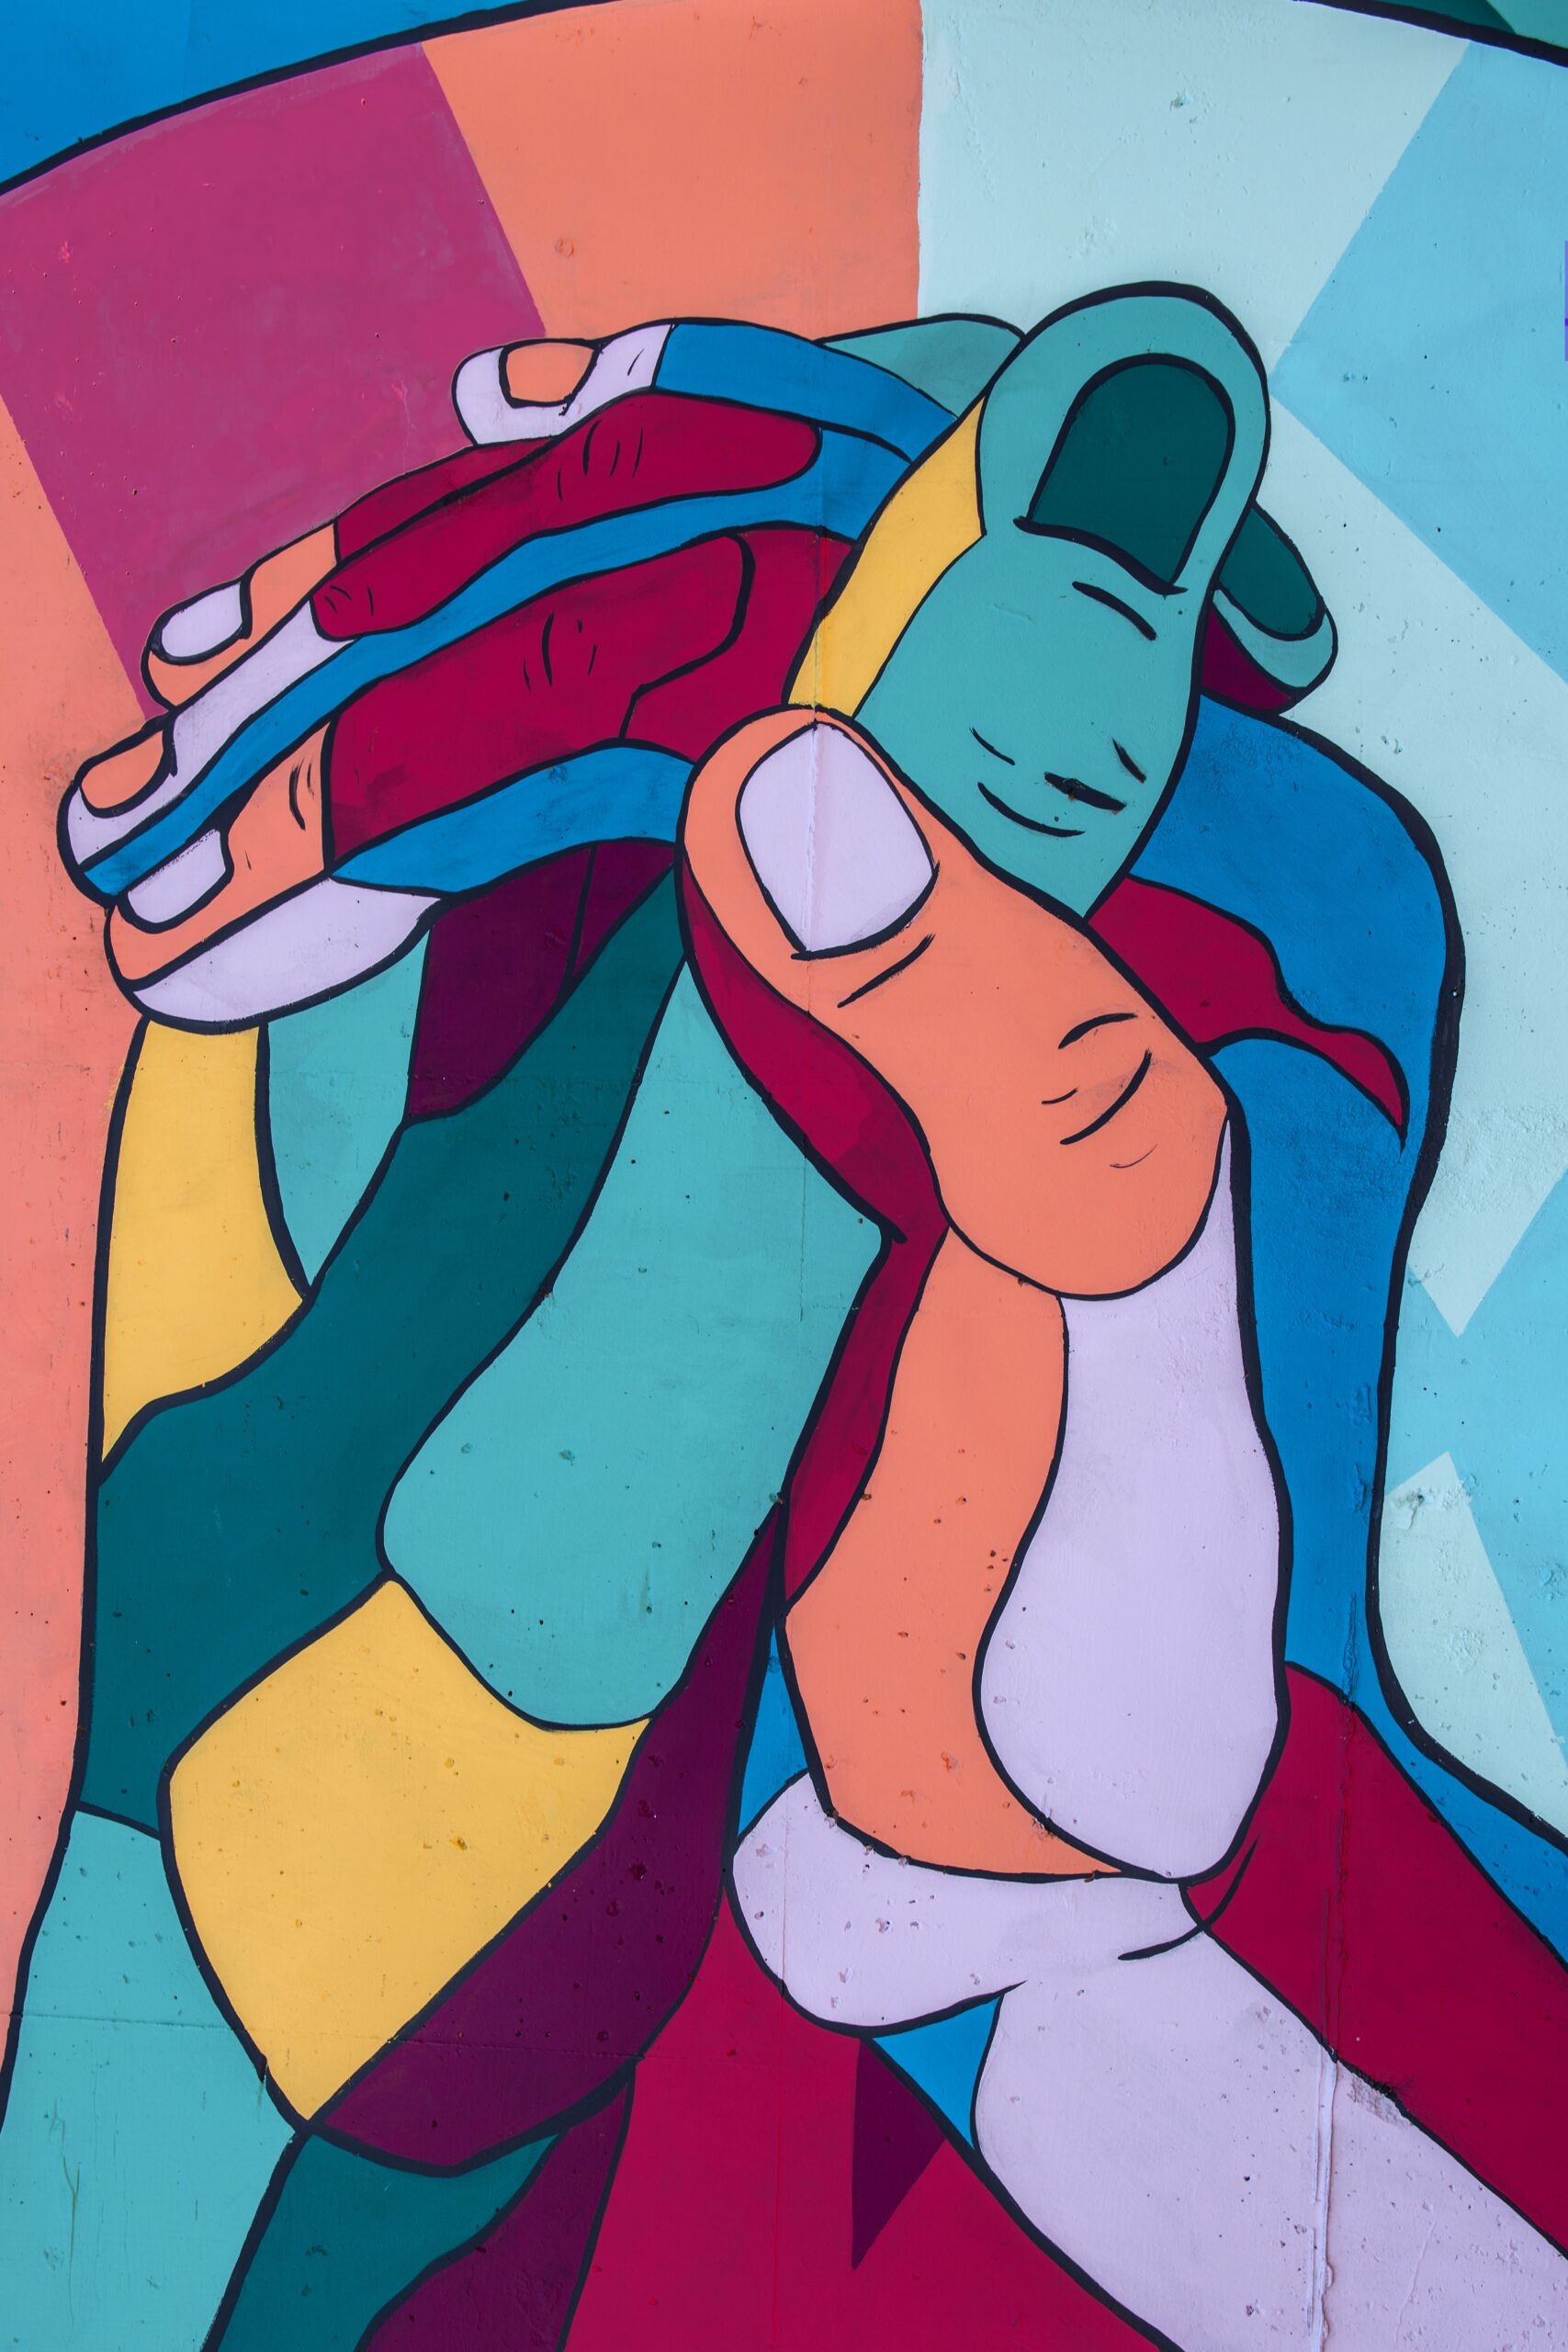 Mural of two hands intertwining, done in a geometric, multicolored style